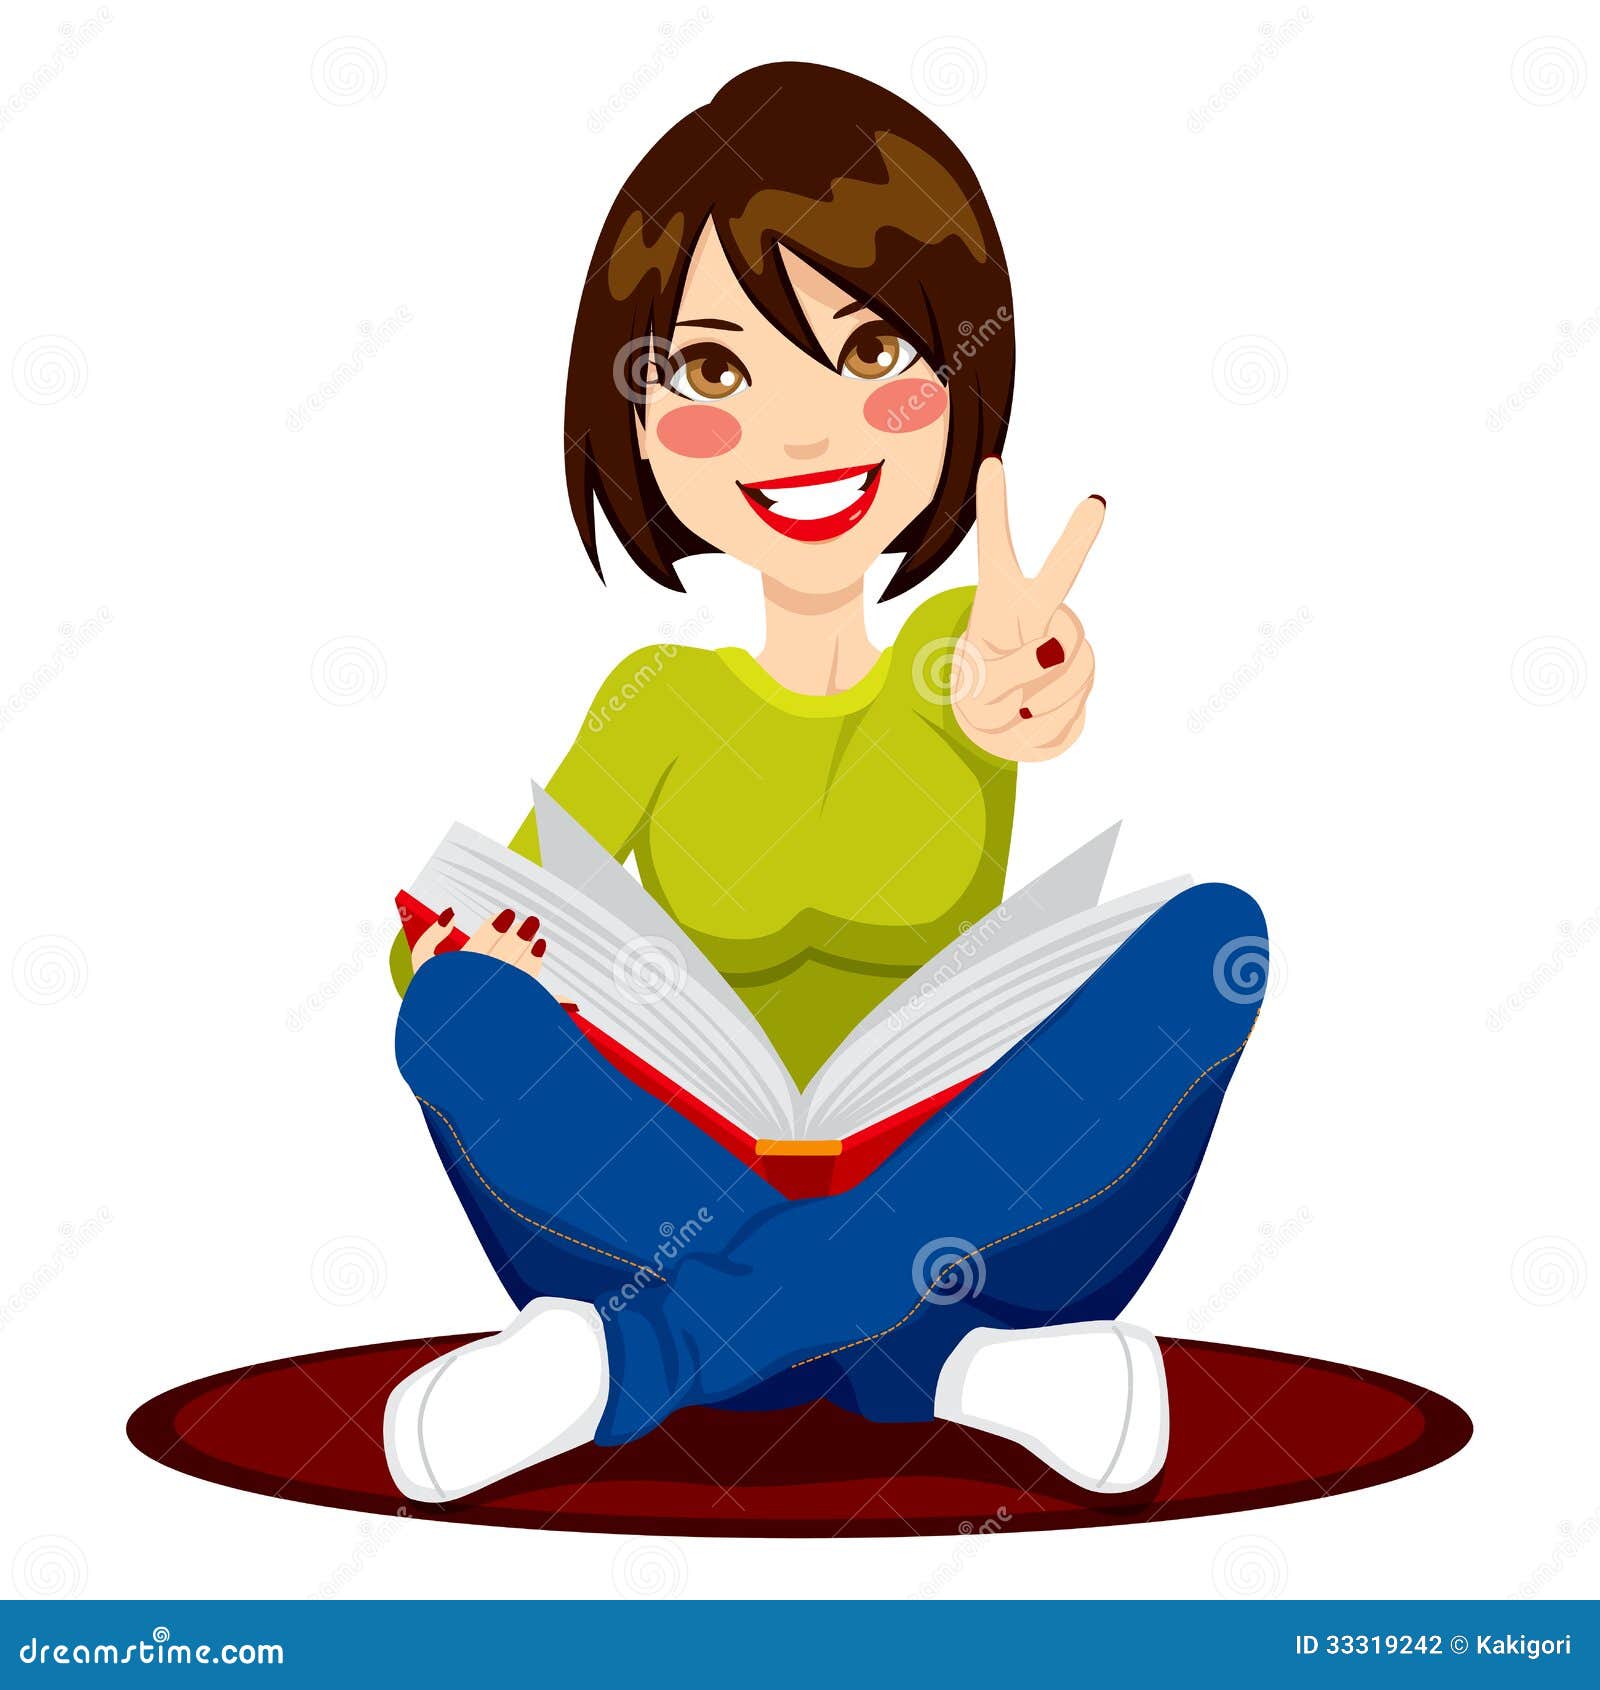 clipart woman reading book - photo #29